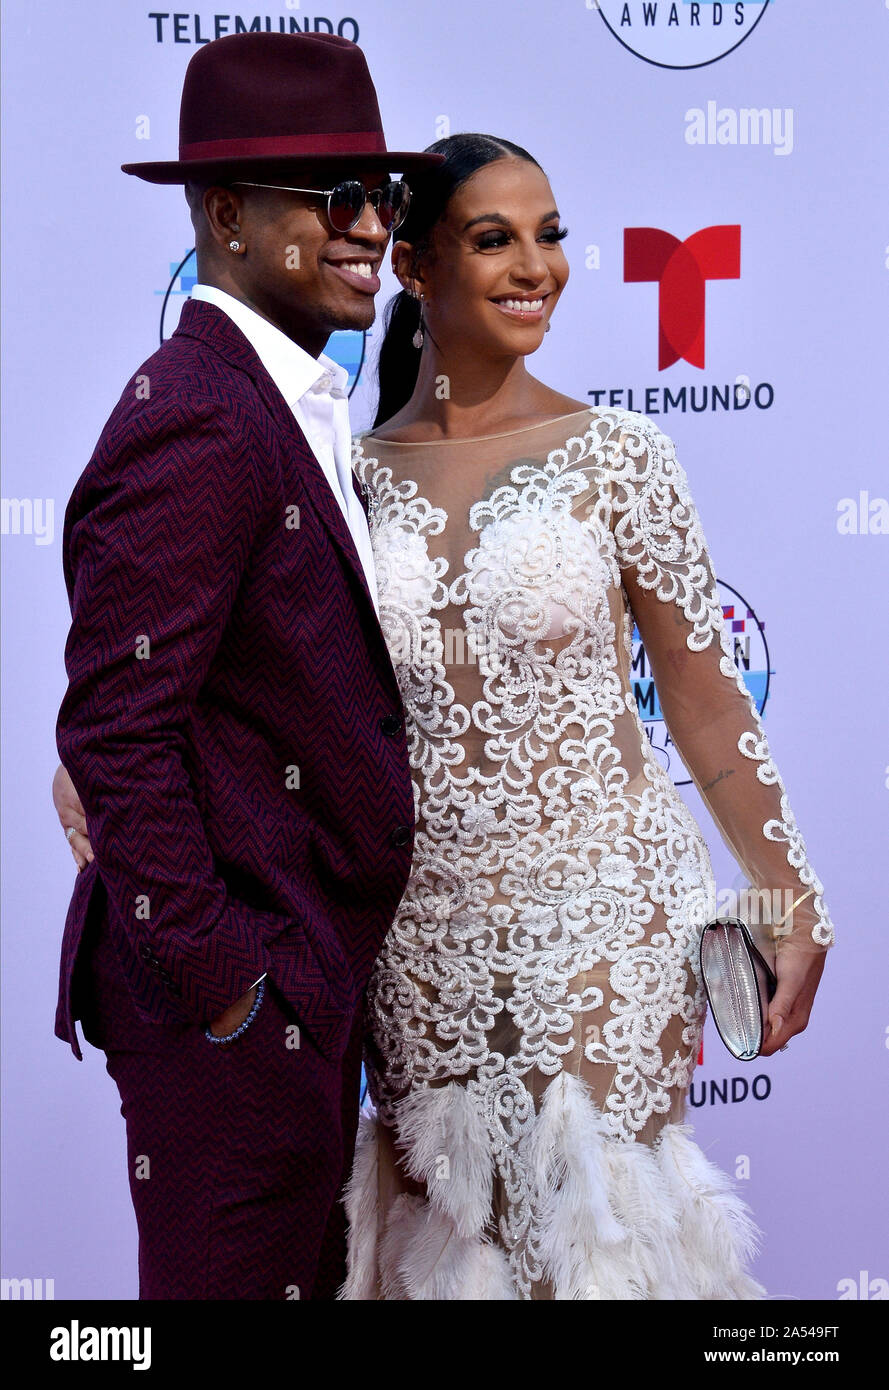 Los Angeles, United States. 17th Oct, 2019. Singer Ne-Yo (L) and Crystal Renay arrive for the fifth annual Latin American Music Awards at the Dolby Theatre in the Hollywood section of Los Angeles on Thursday, October 17, 2019. The annual event honors outstanding achievements for artists in the Latin music industry. Photo by Jim Ruymen/UPI Credit: UPI/Alamy Live News Stock Photo